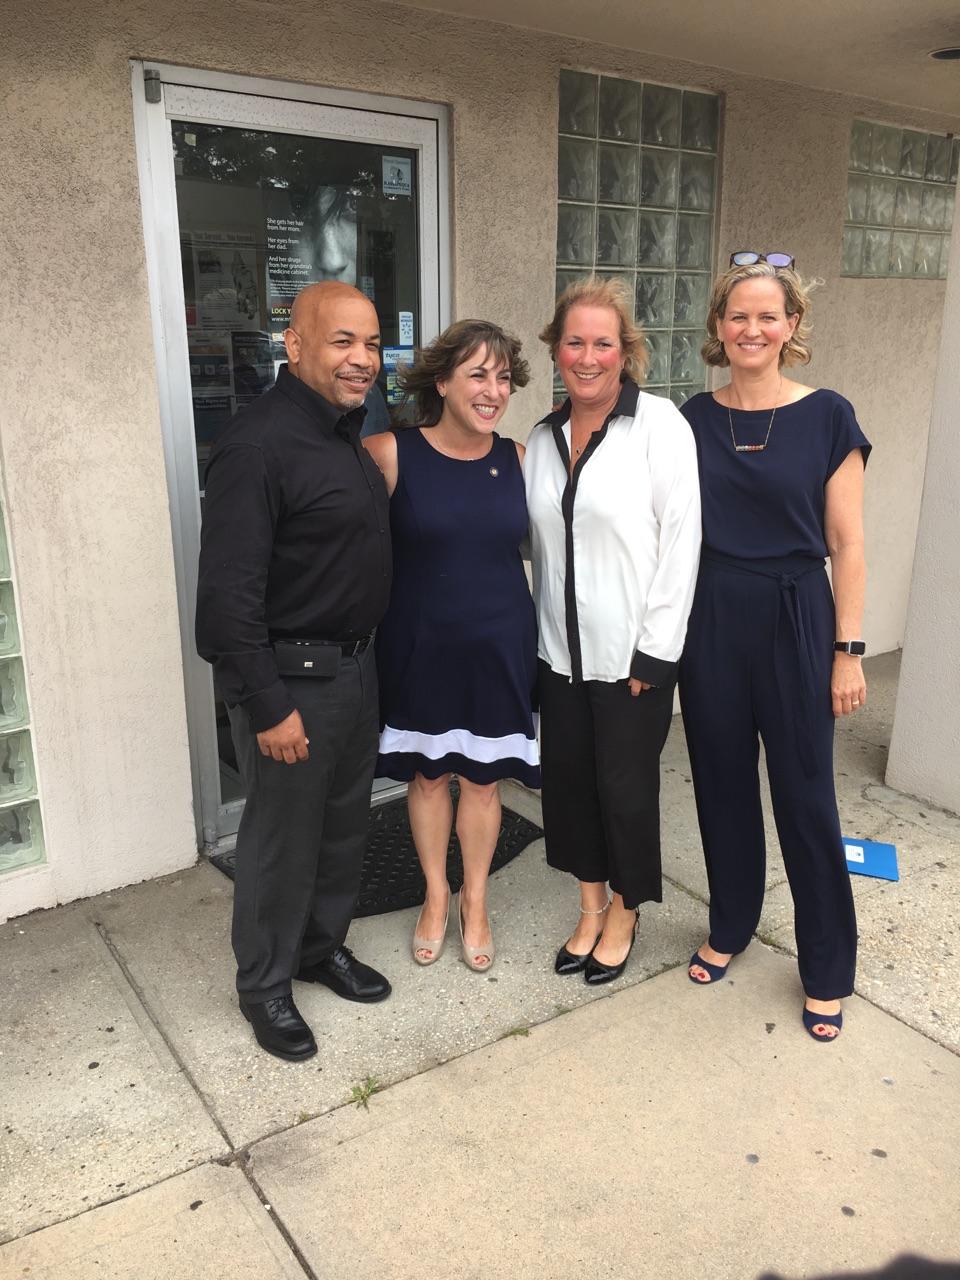 Pictured with Speaker Heastie in the first photo at YES Community Counseling Center (from left to right): Assemblymember Christine Pellegrino, YES Community Counseling Center Executive Director Jamie Bogenschultz and Nassau County Executive Laura Curran.